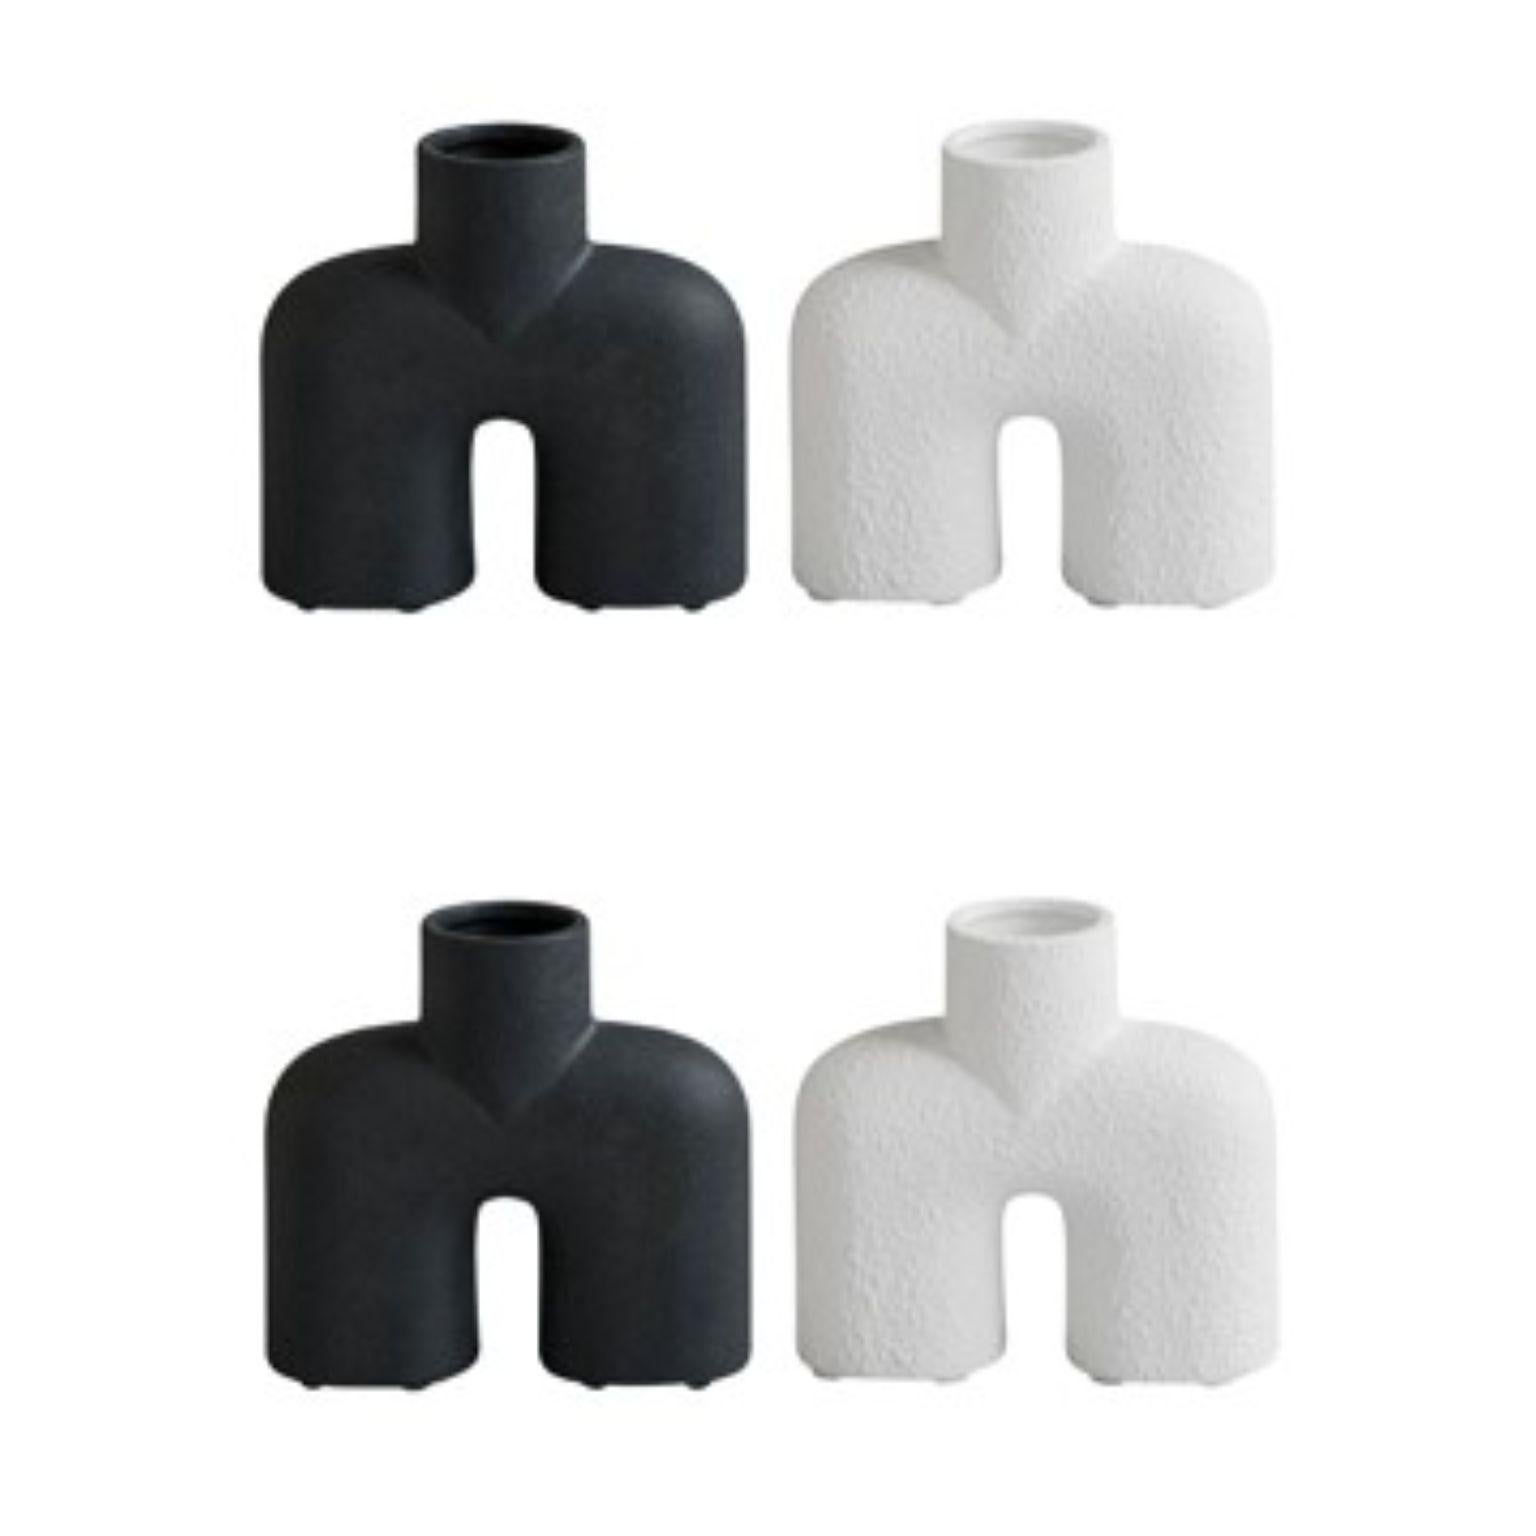 Set of 4 Cobra Uno Mini by 101 Copenhagen
Designed by Kristian Sofus Hansen & Tommy Hyldahl
Dimensions: L18 / W6,5 / H16,5 CM
Materials: Ceramic

A tribute to the Cobra Arts Movement of the 1960s, the collection is the epitome of quirky vases